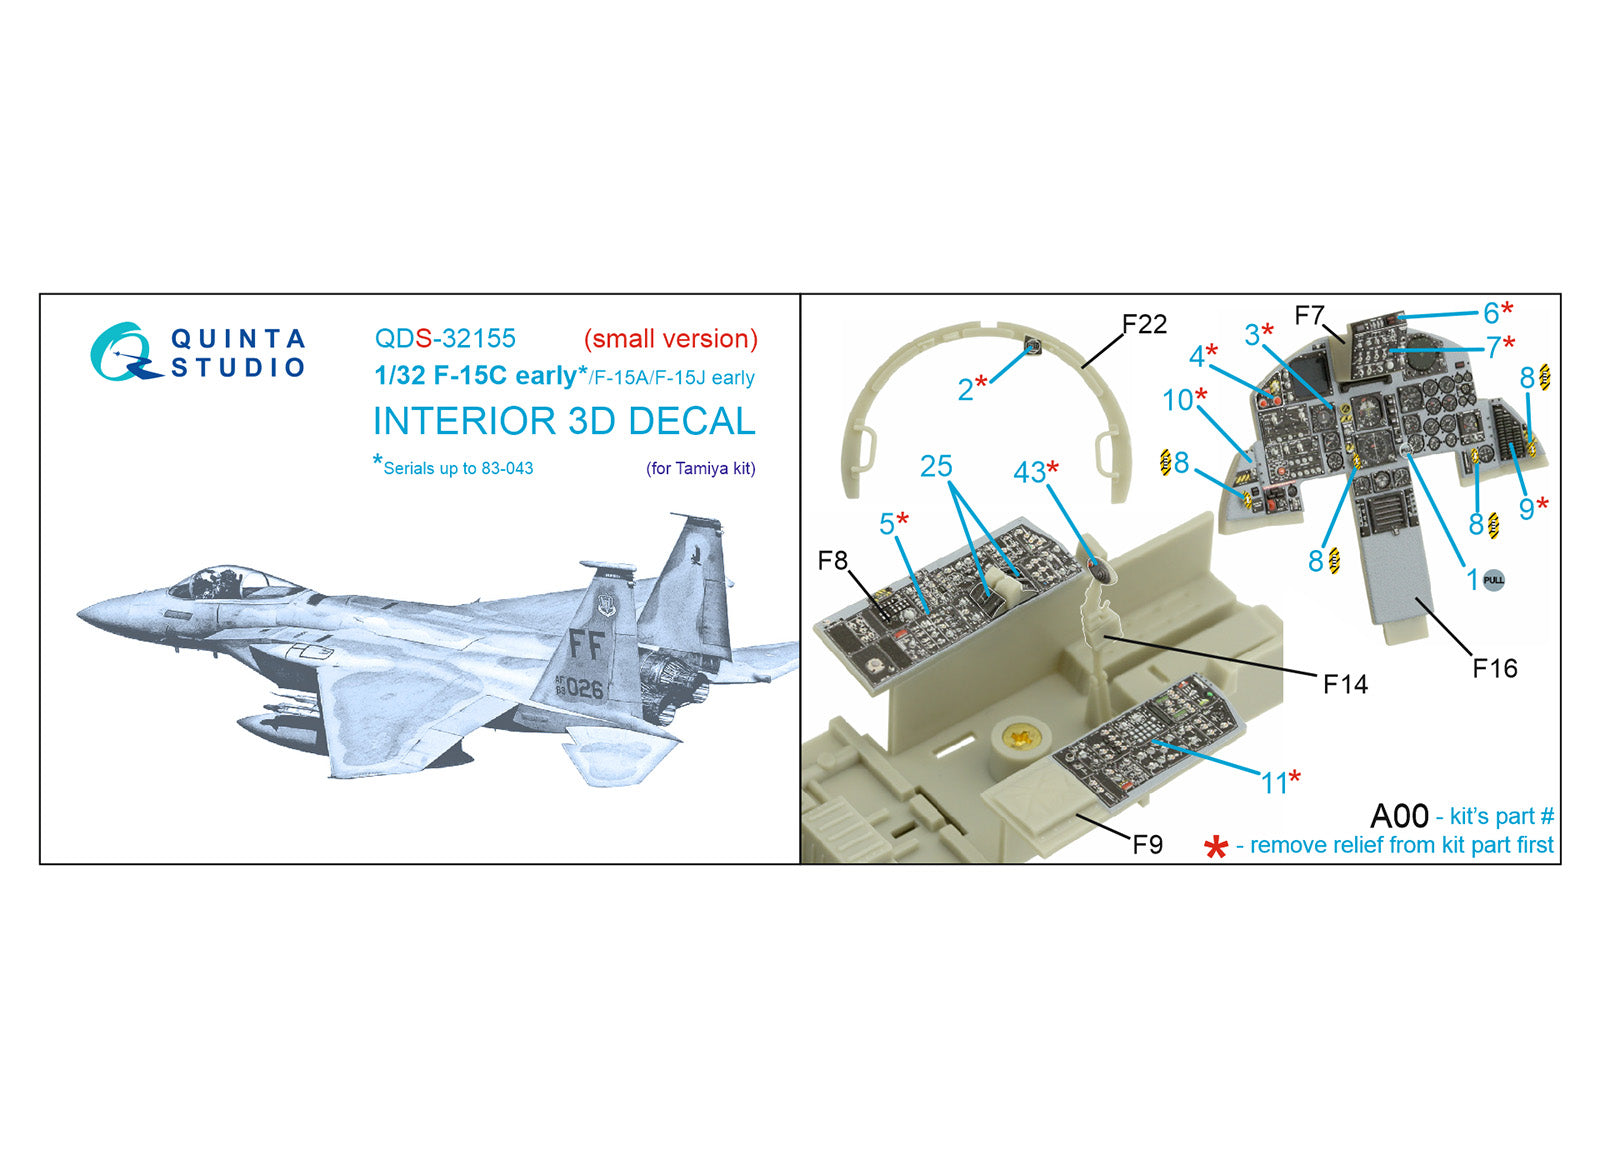 Quinta Studio - 1/32 F-15C early/F-15A/F-15J early QDS-32155 for Tamiya kit (small version)